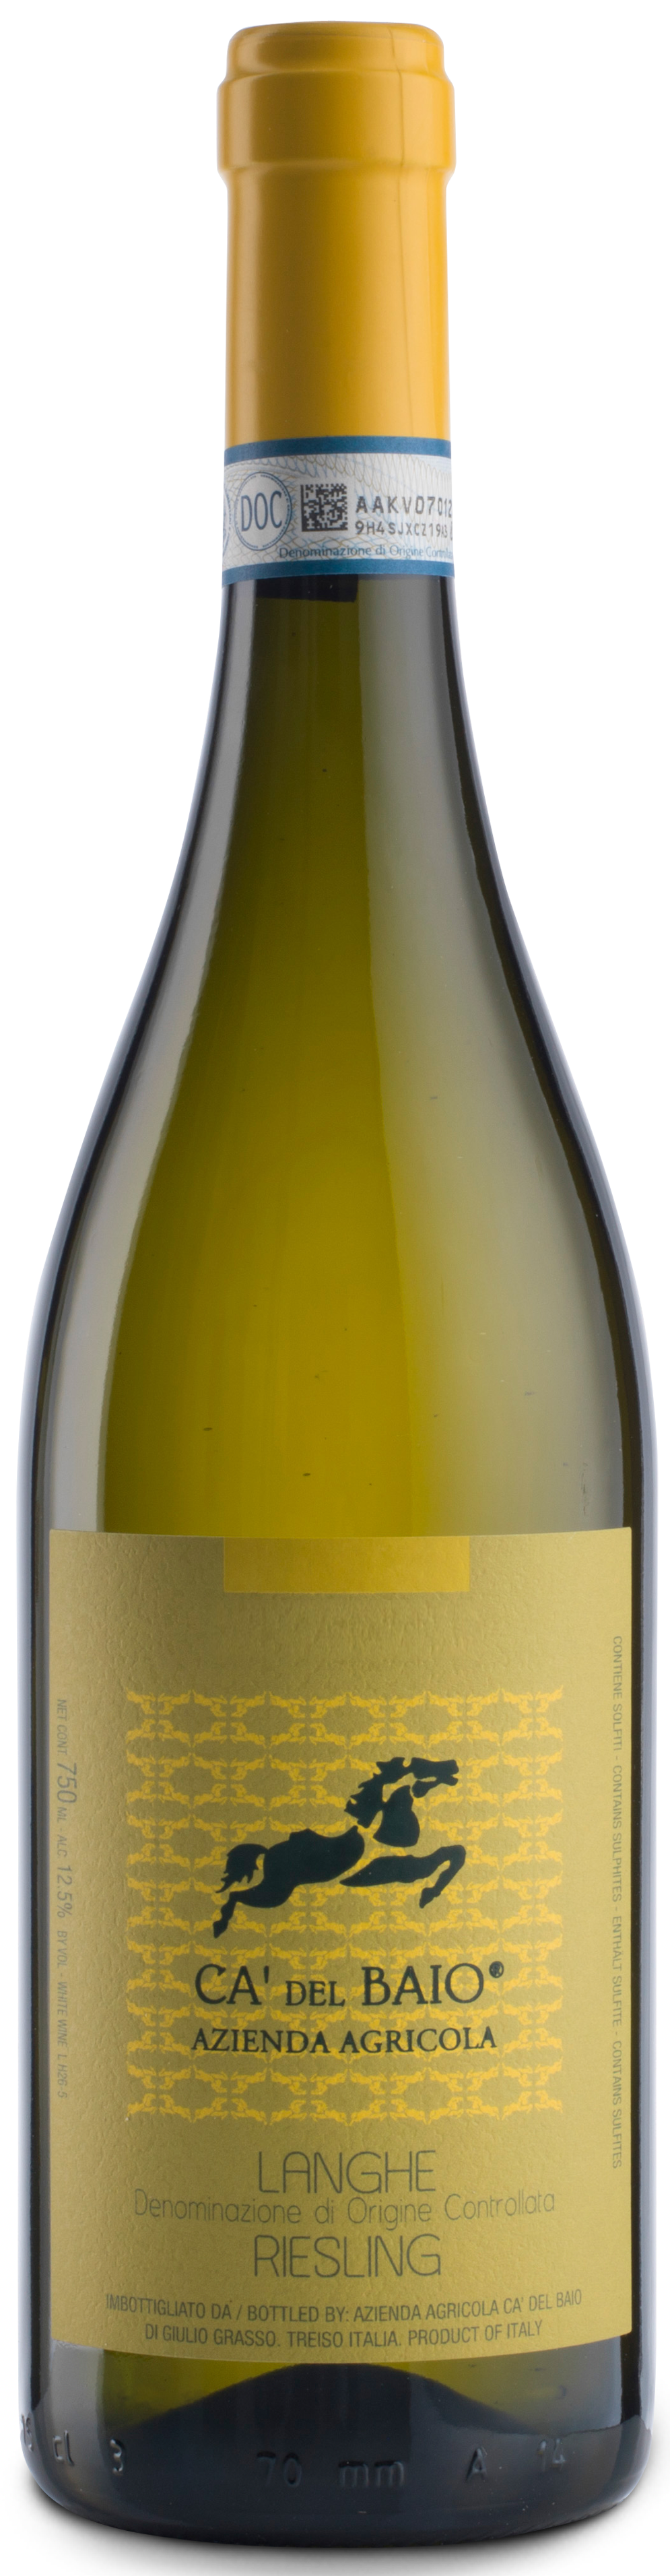 Ca' Del Baio, Langhe Riesling, 2012